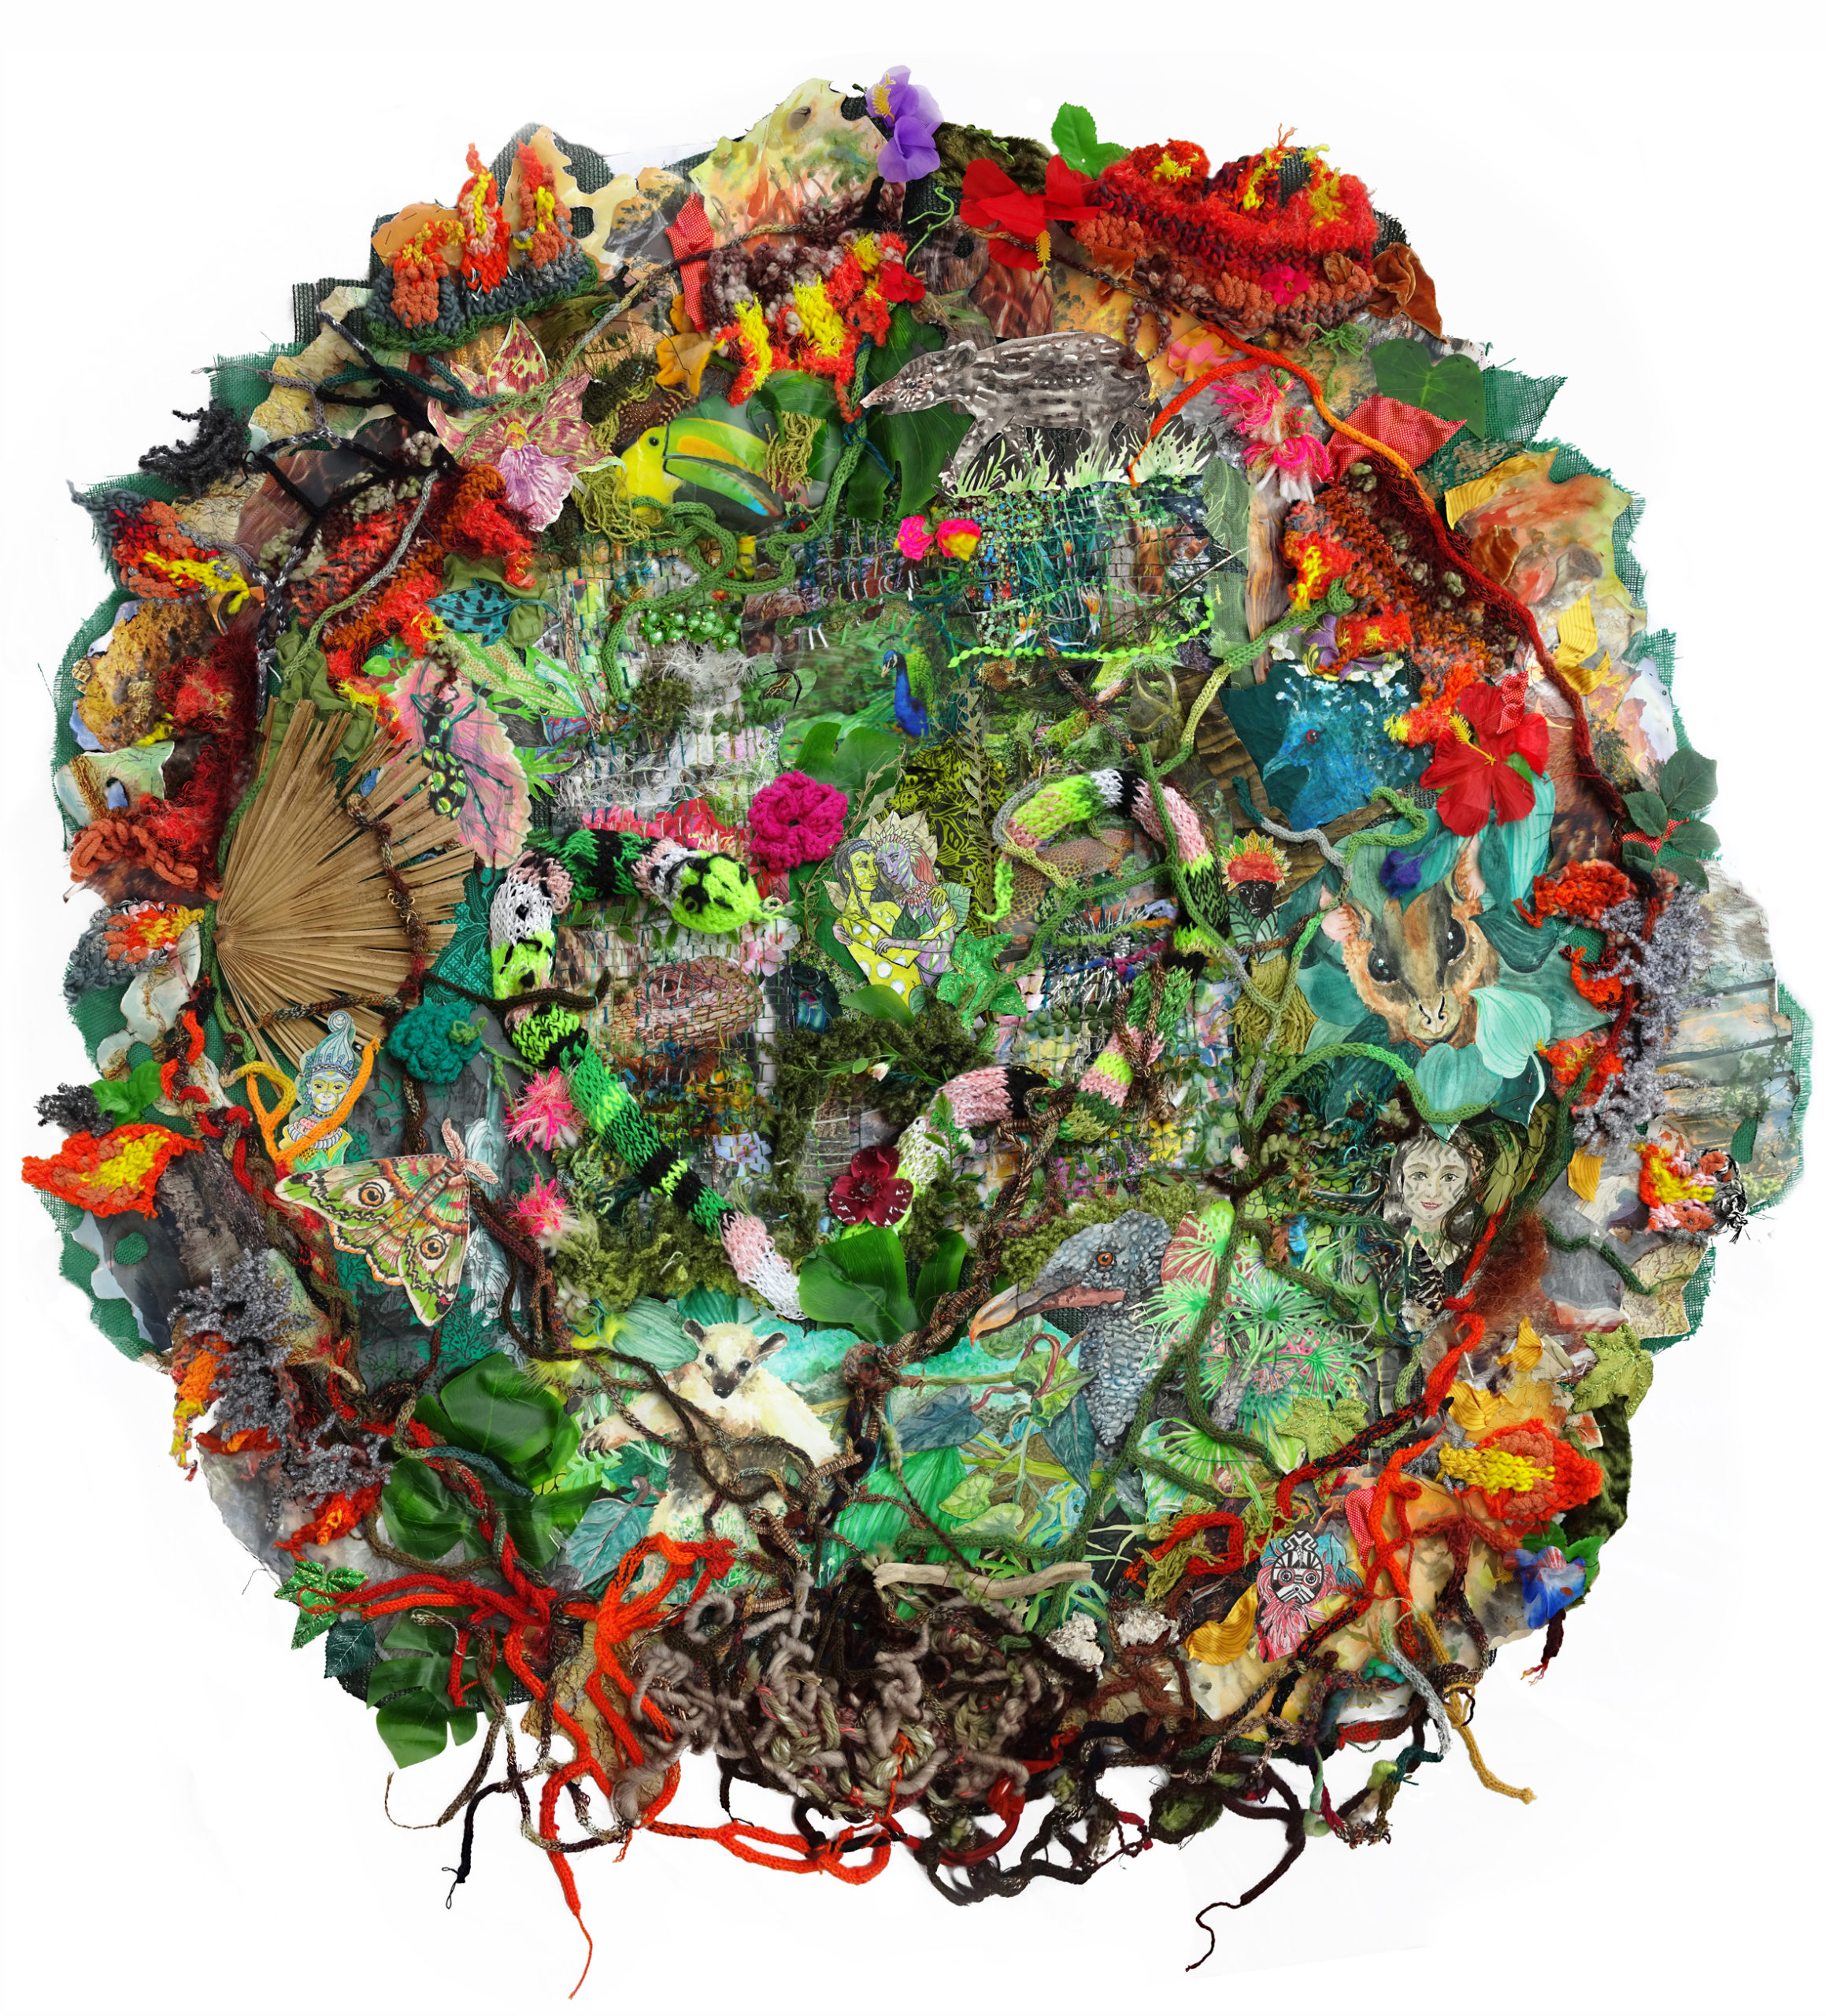 Multimedia collage depicting a forest